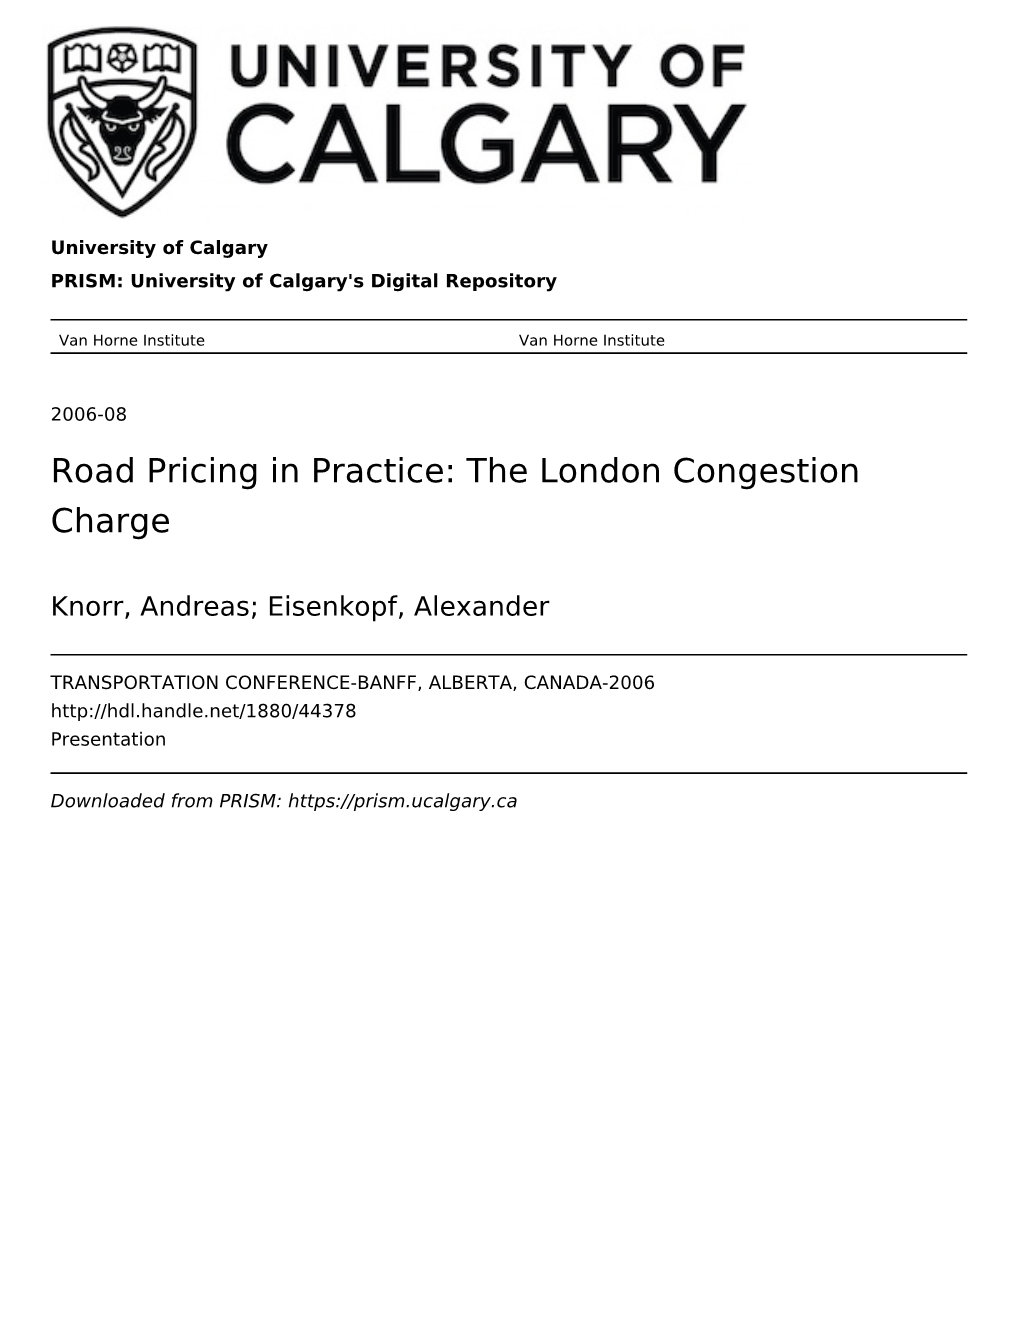 Road Pricing in Practice: the London Congestion Charge